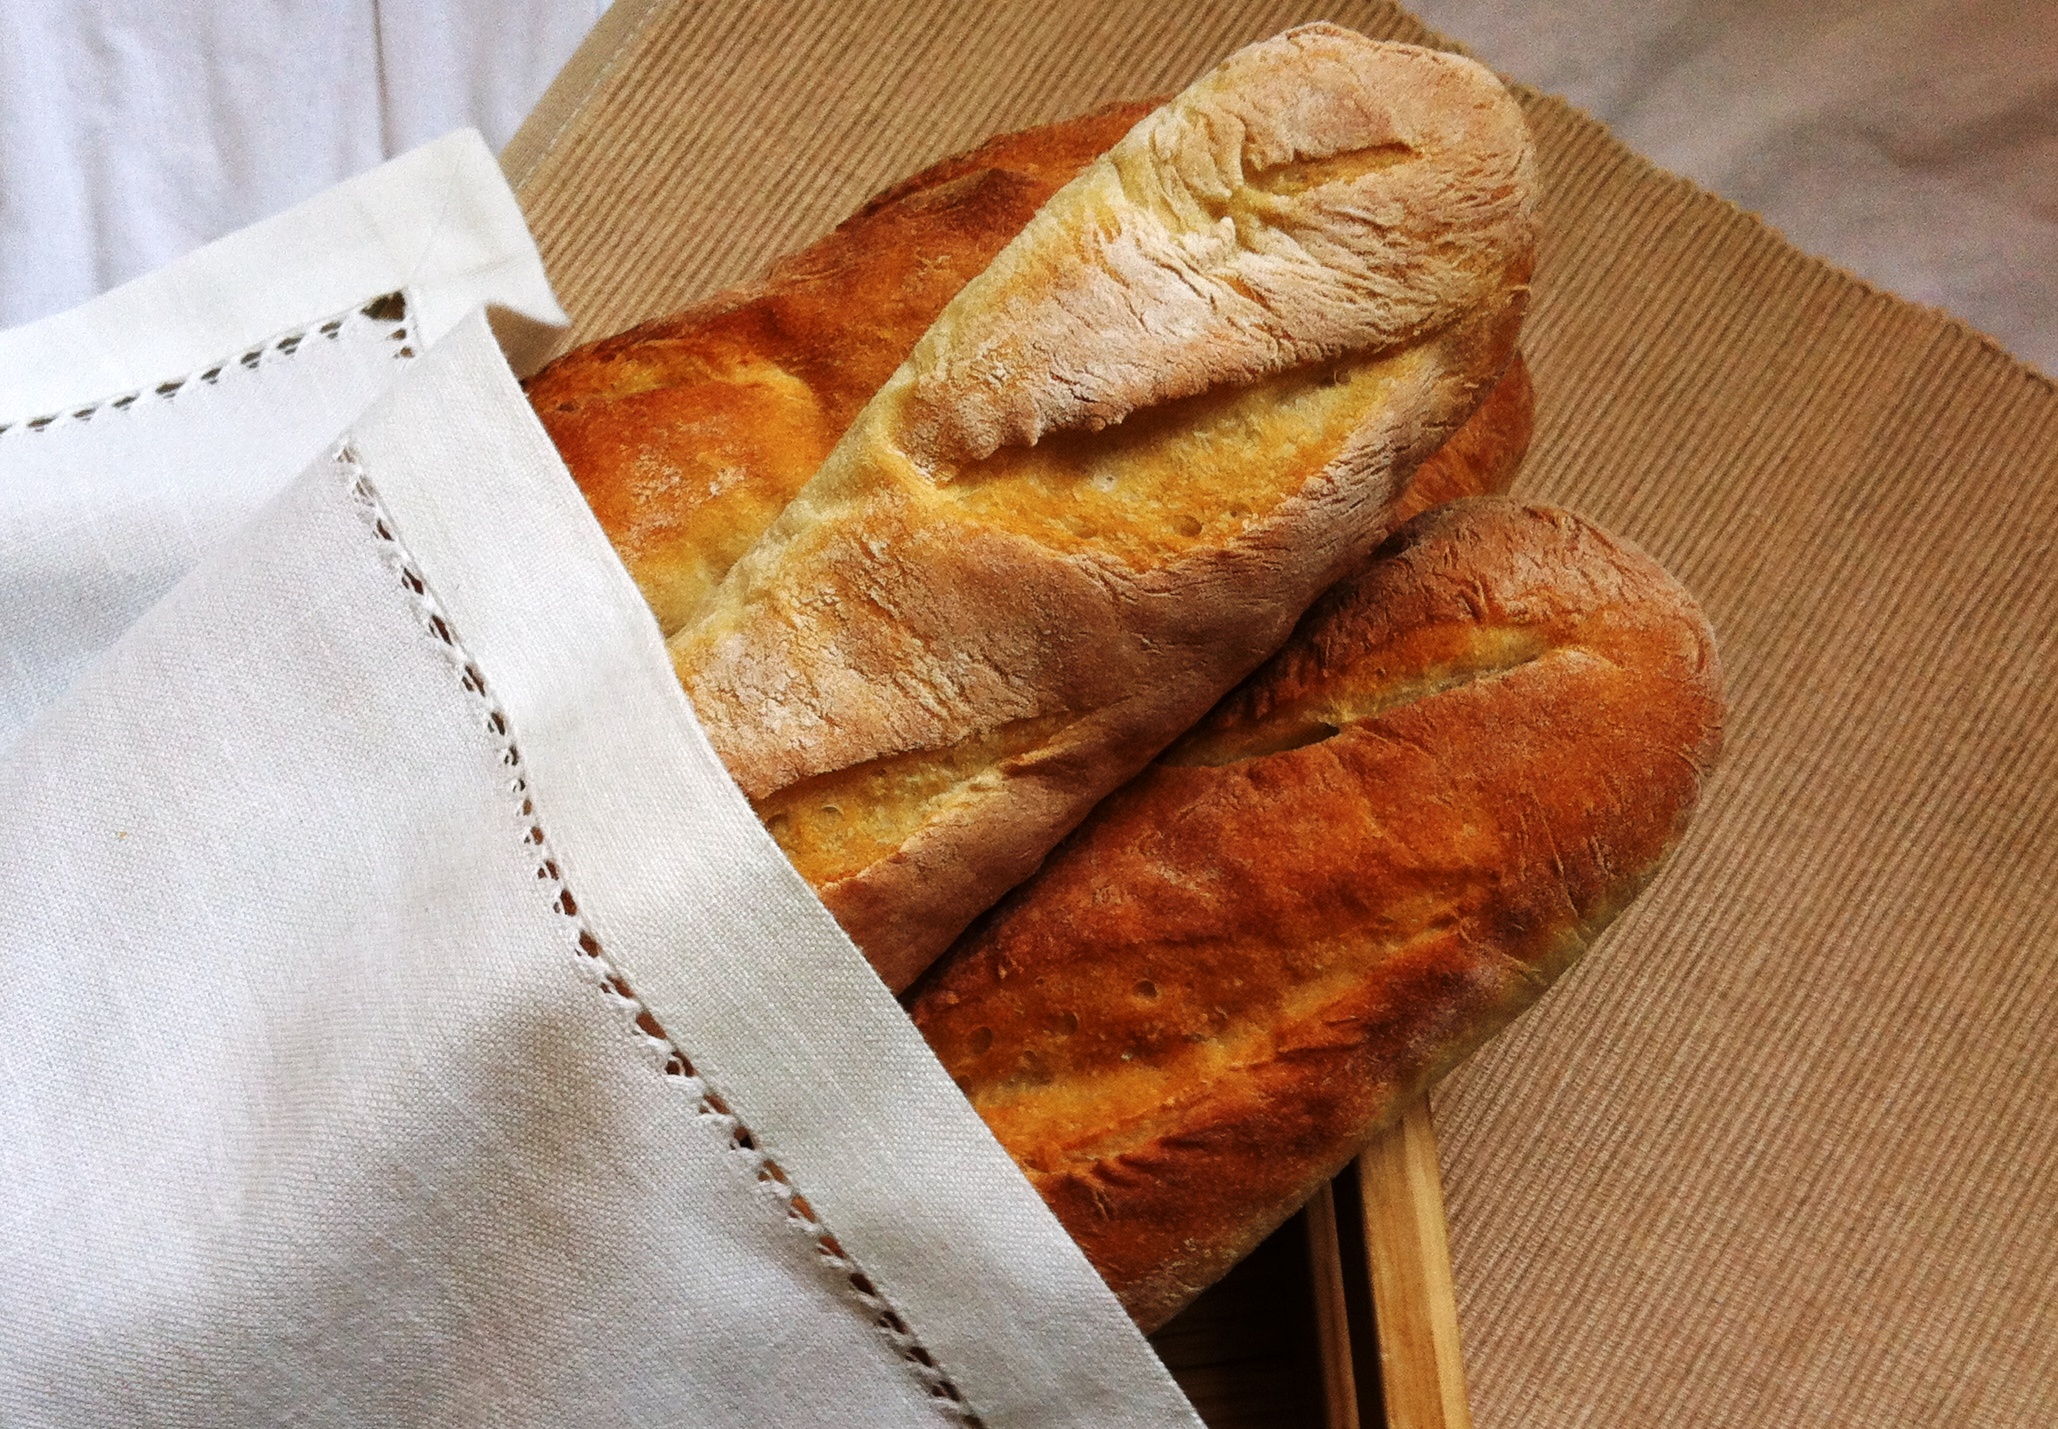 french_bread